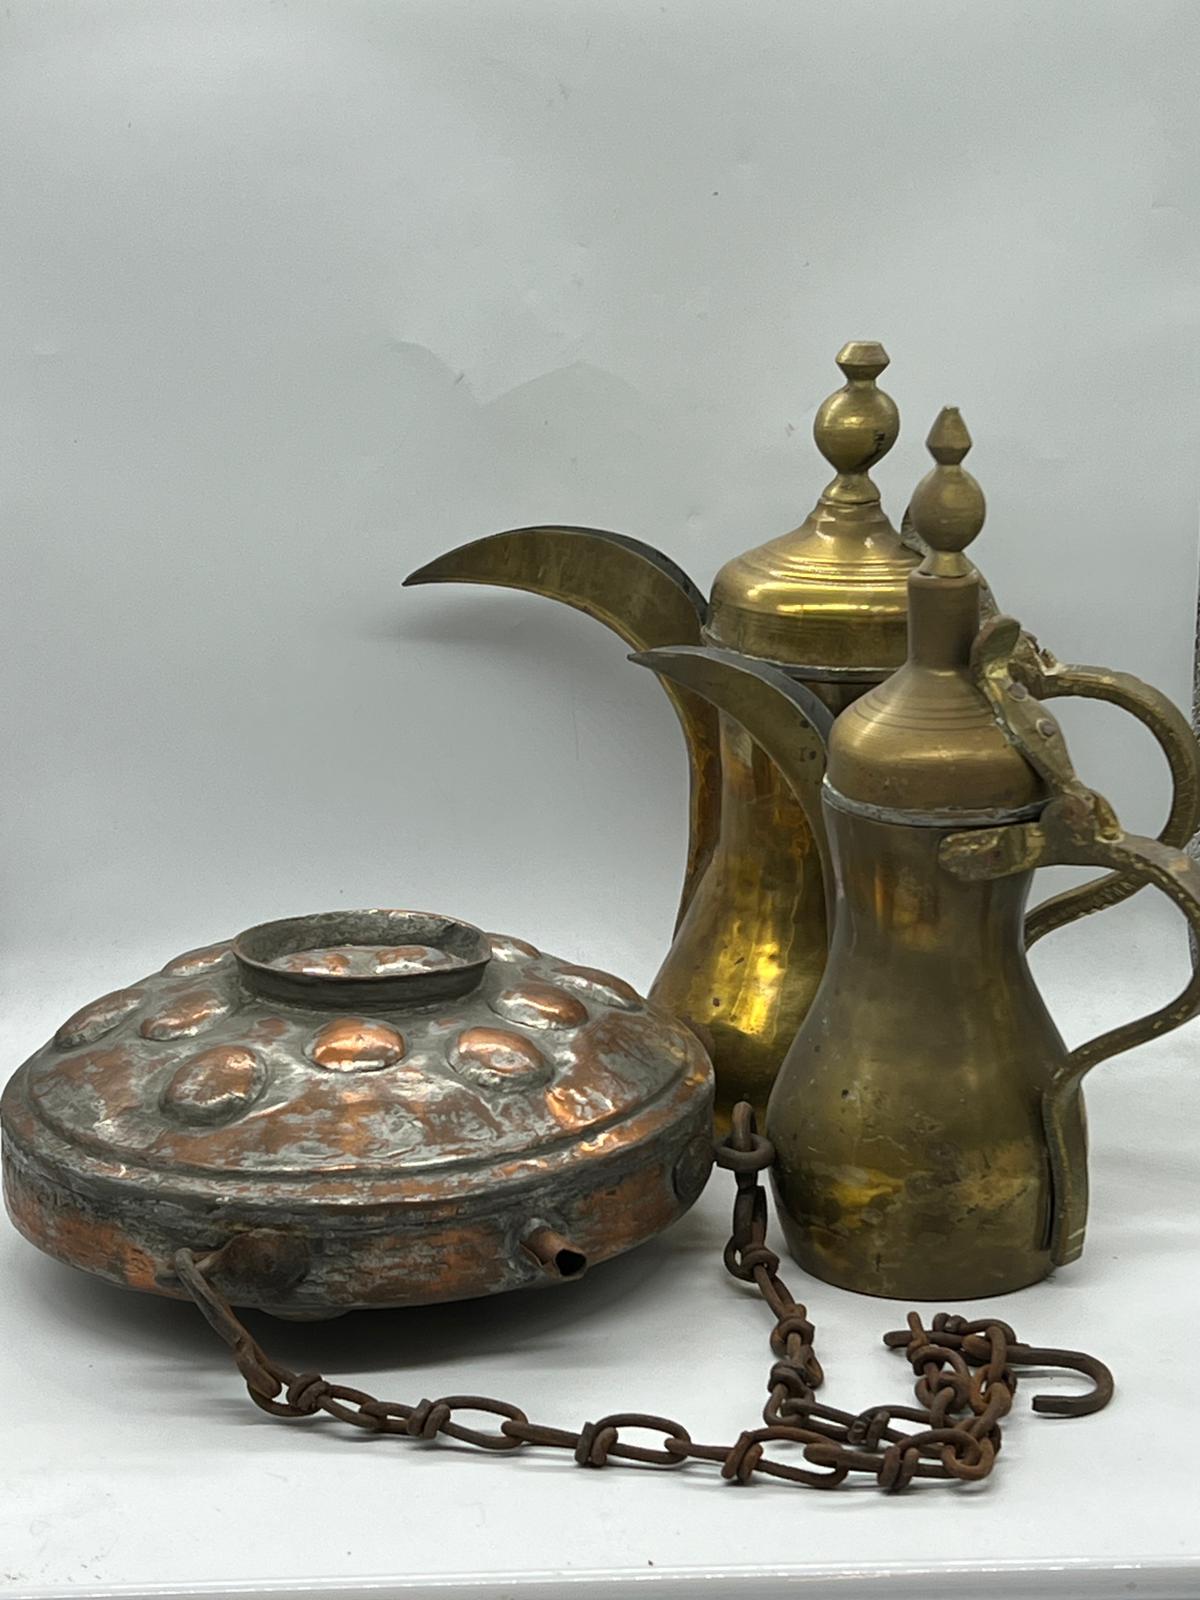 Two Middles Eastern coffee pots and a copper flask/container on a chain